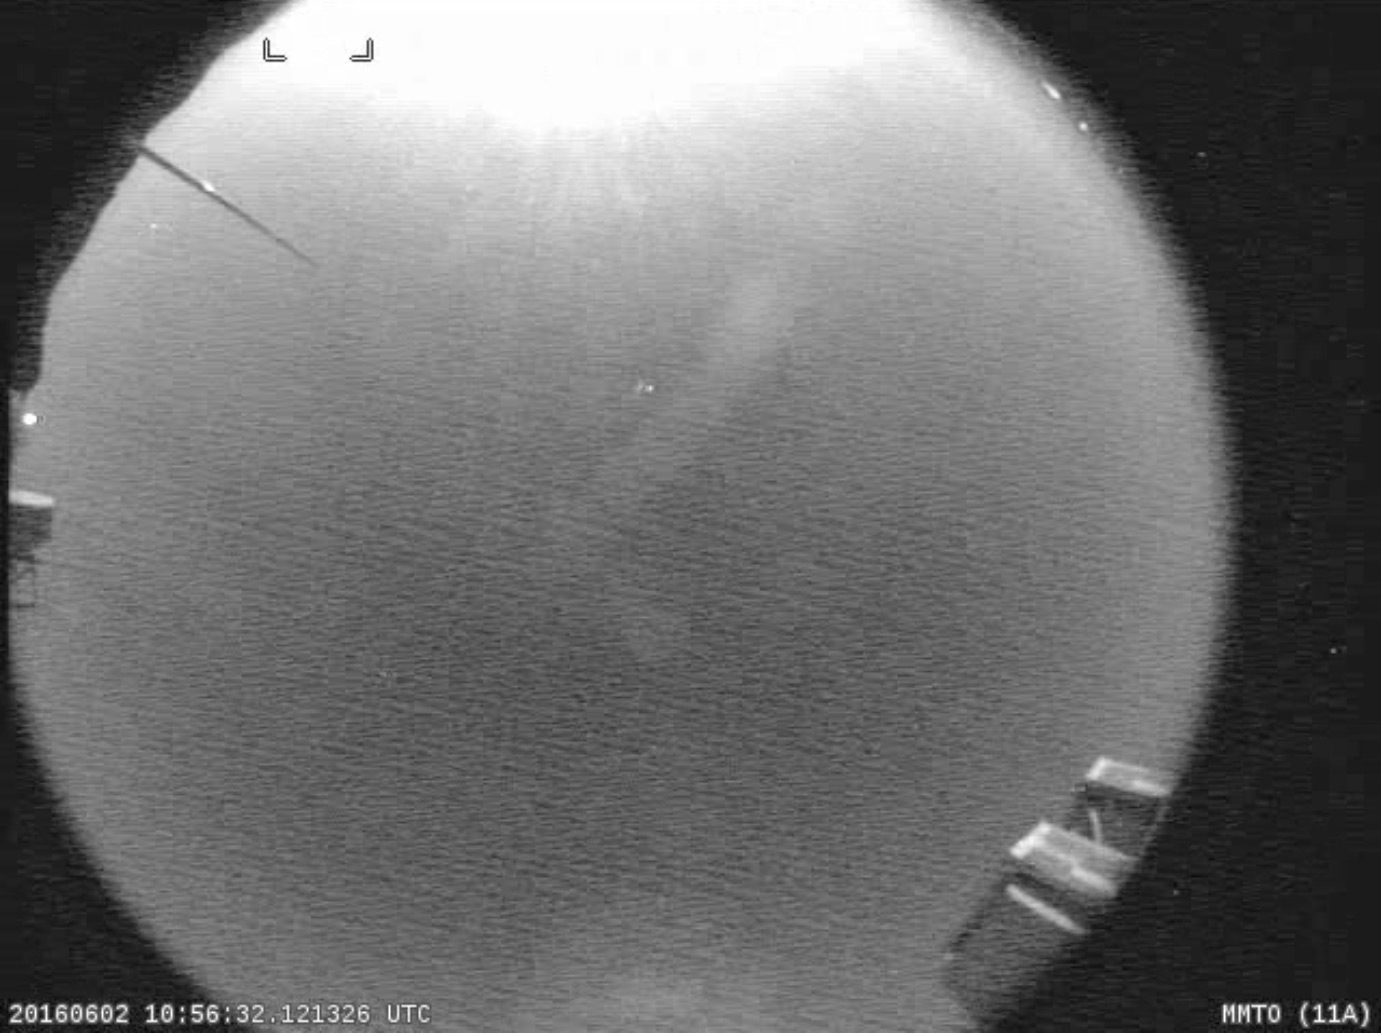 A screengrab from video obtained from the NASA meteor camera situated at the MMT Observatory on the site of the Fred Lawrence Whipple Observatory, located on Mount Hopkins, Arizona, in the Santa Rita Mountains.